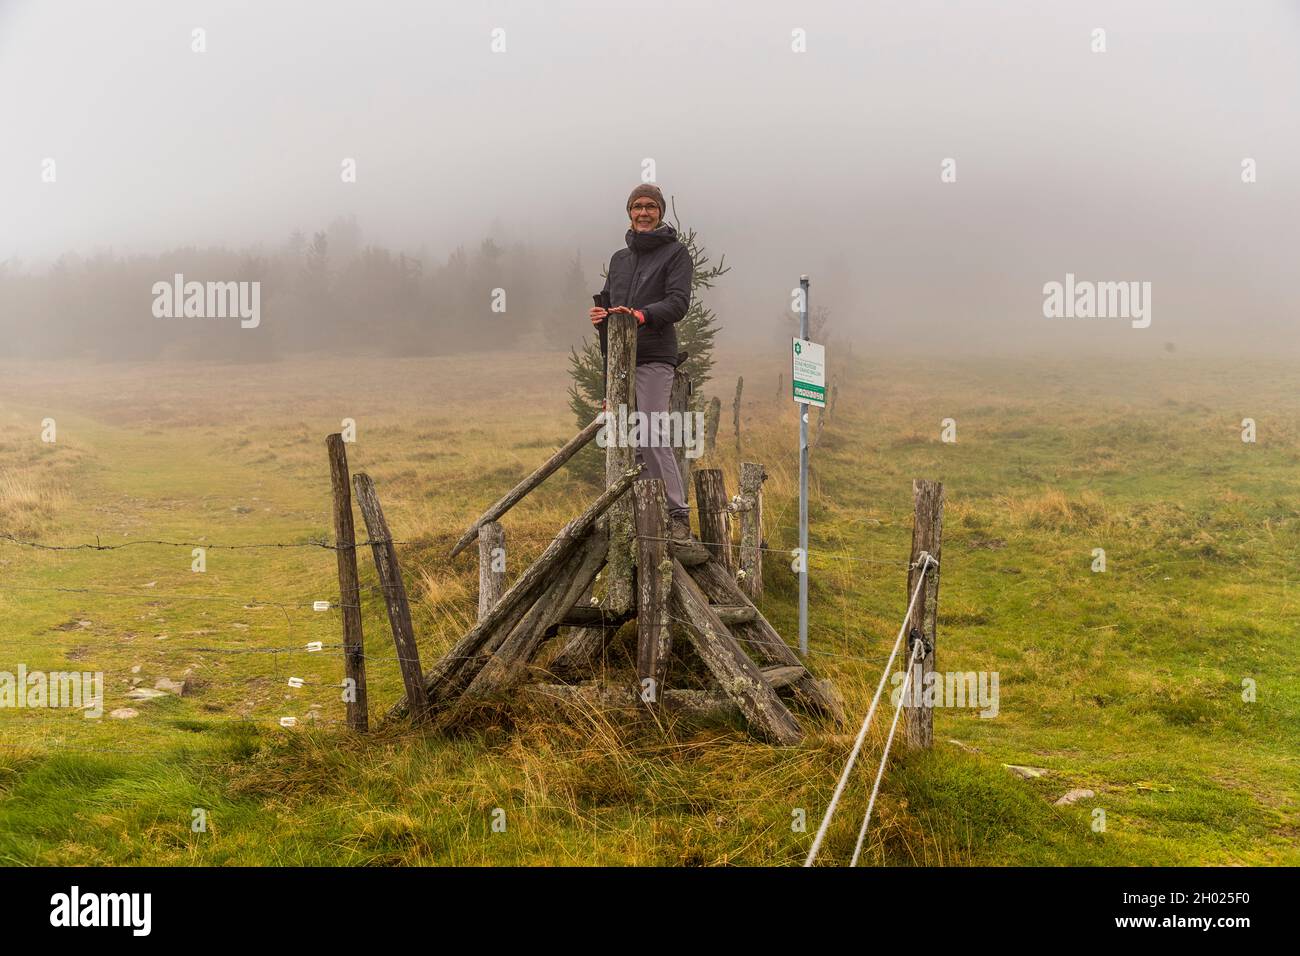 Overcoming a cattle barrier on the trail through the Vosges Mountains near Geishouse, France Stock Photo